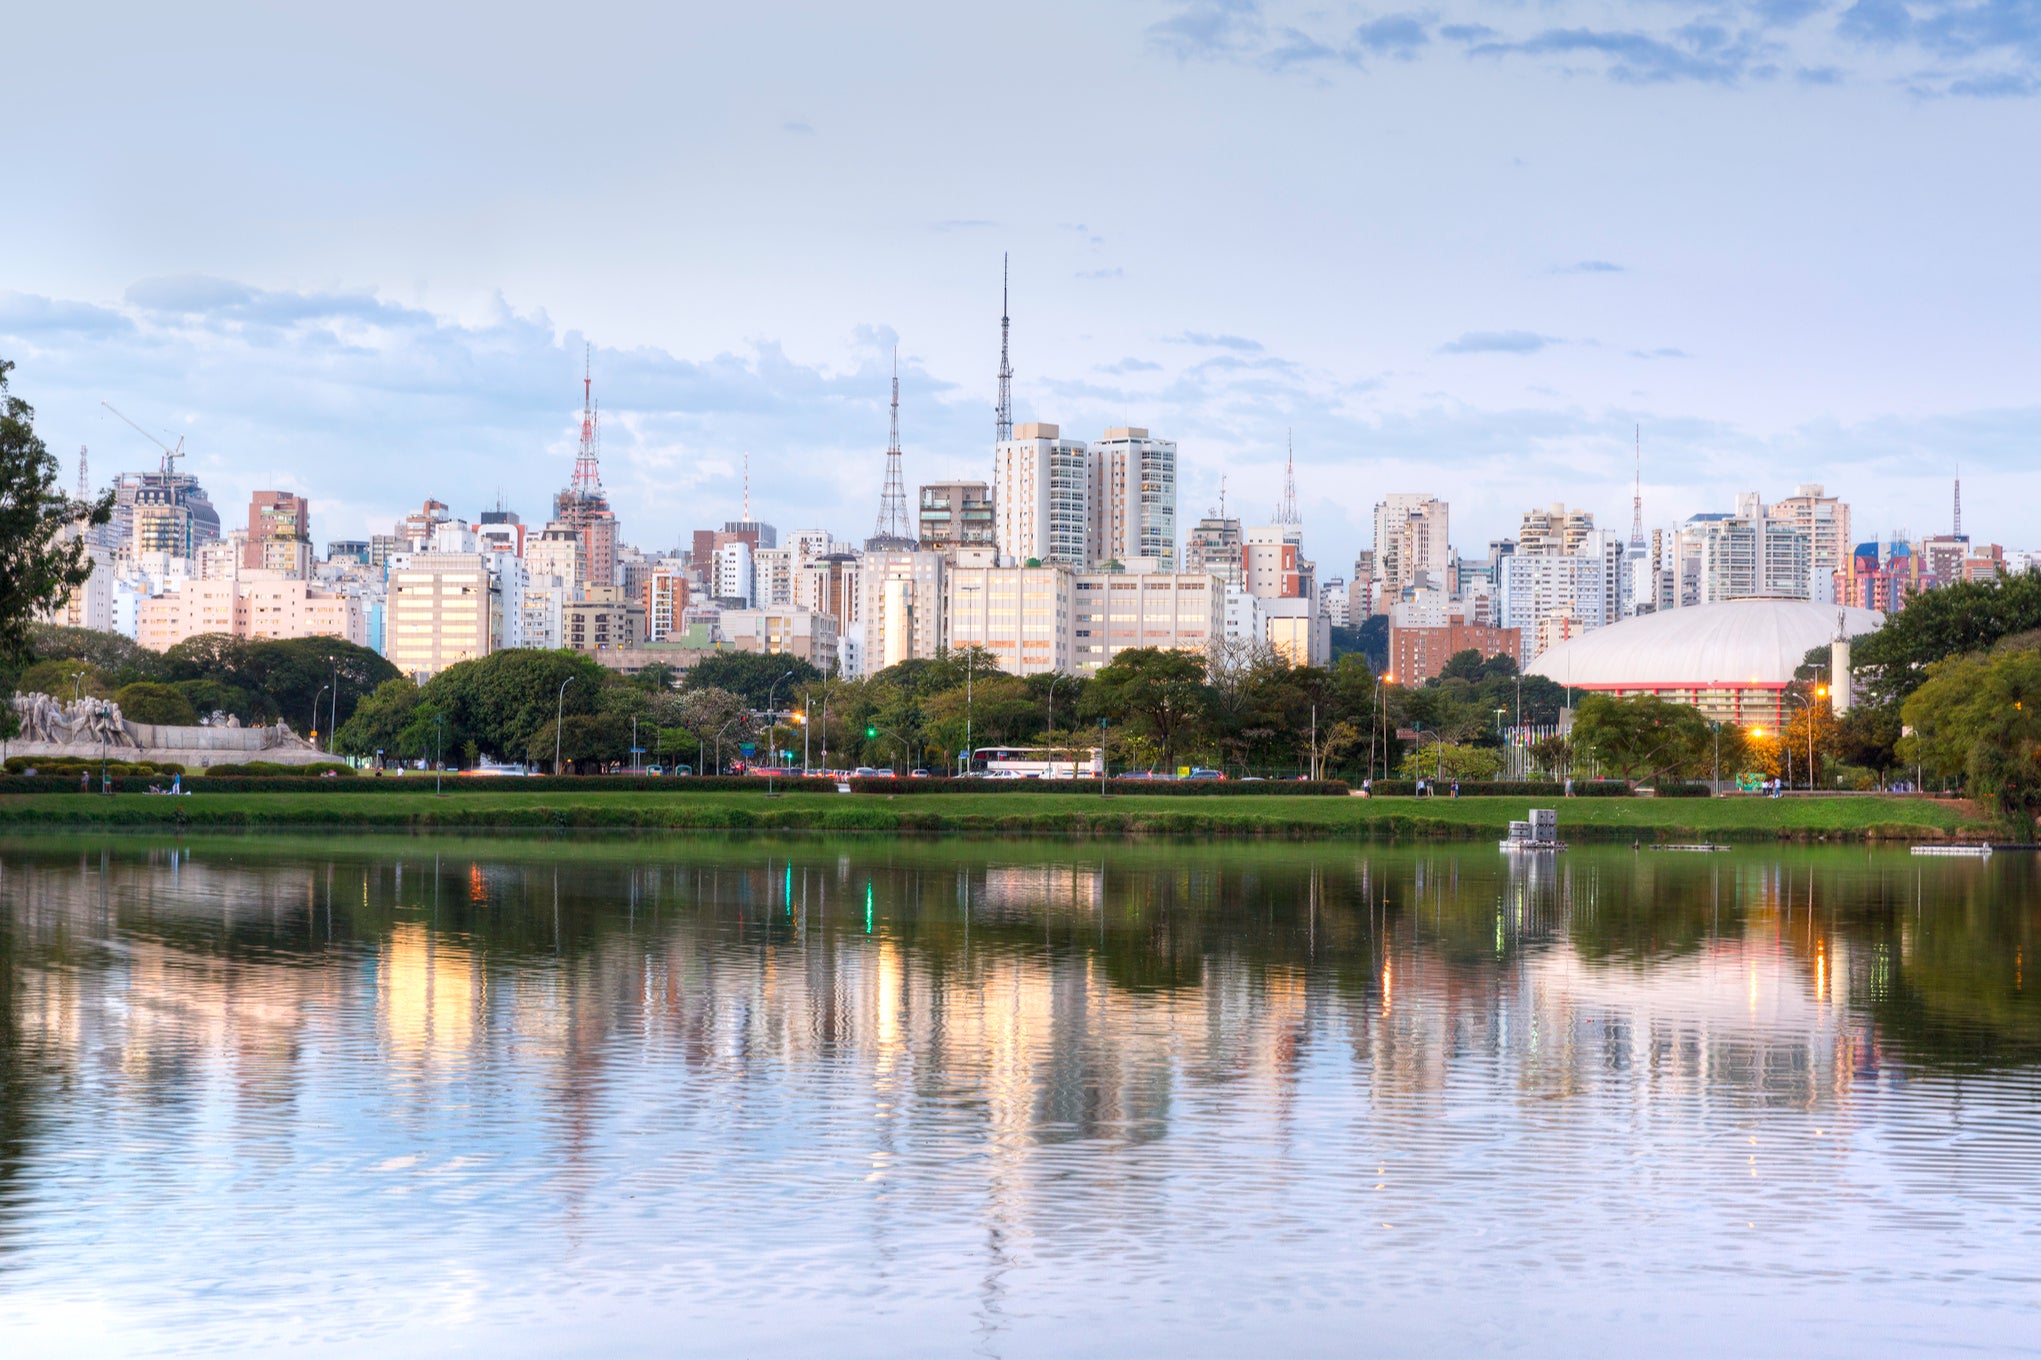 Sao Paulo is grey, unwieldy, busy – but with a beautiful side to discover